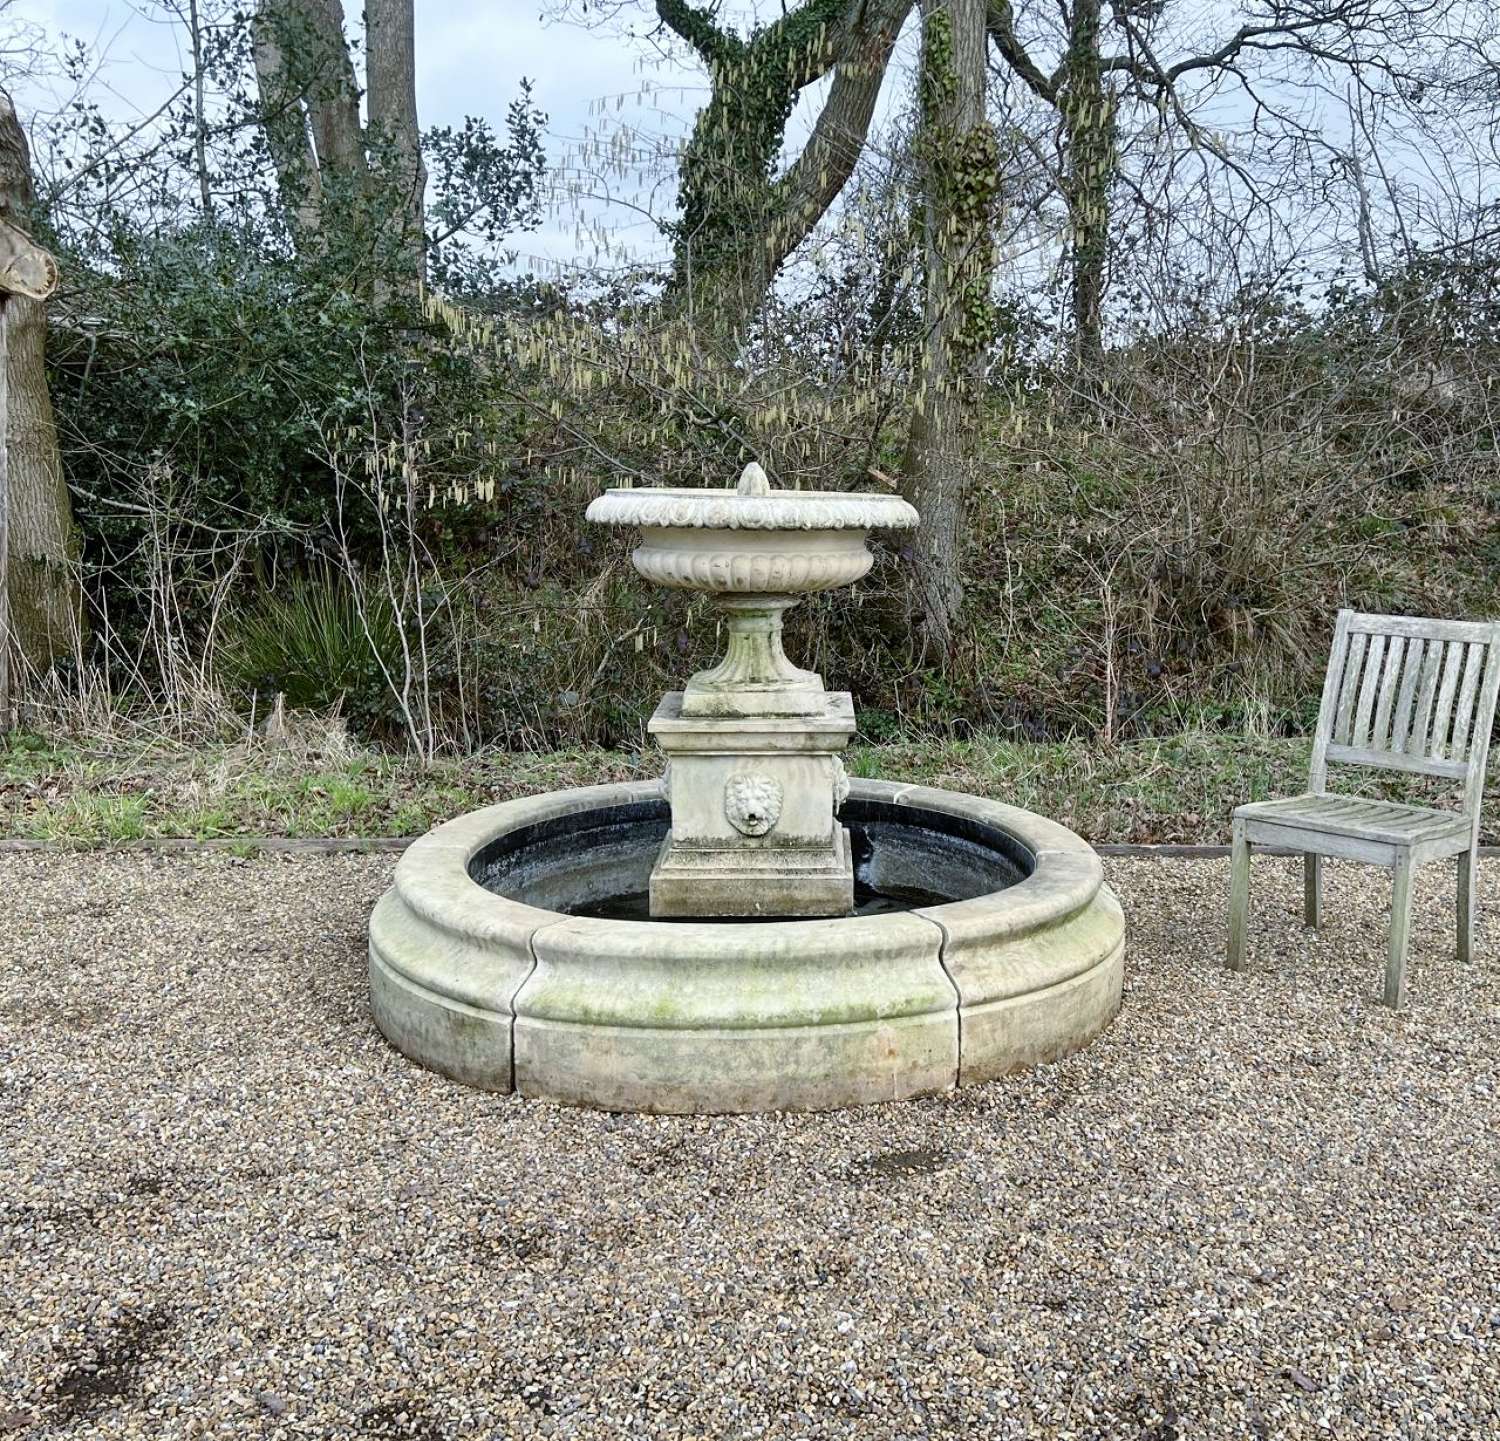 Self-Circulating Fountain with Surround